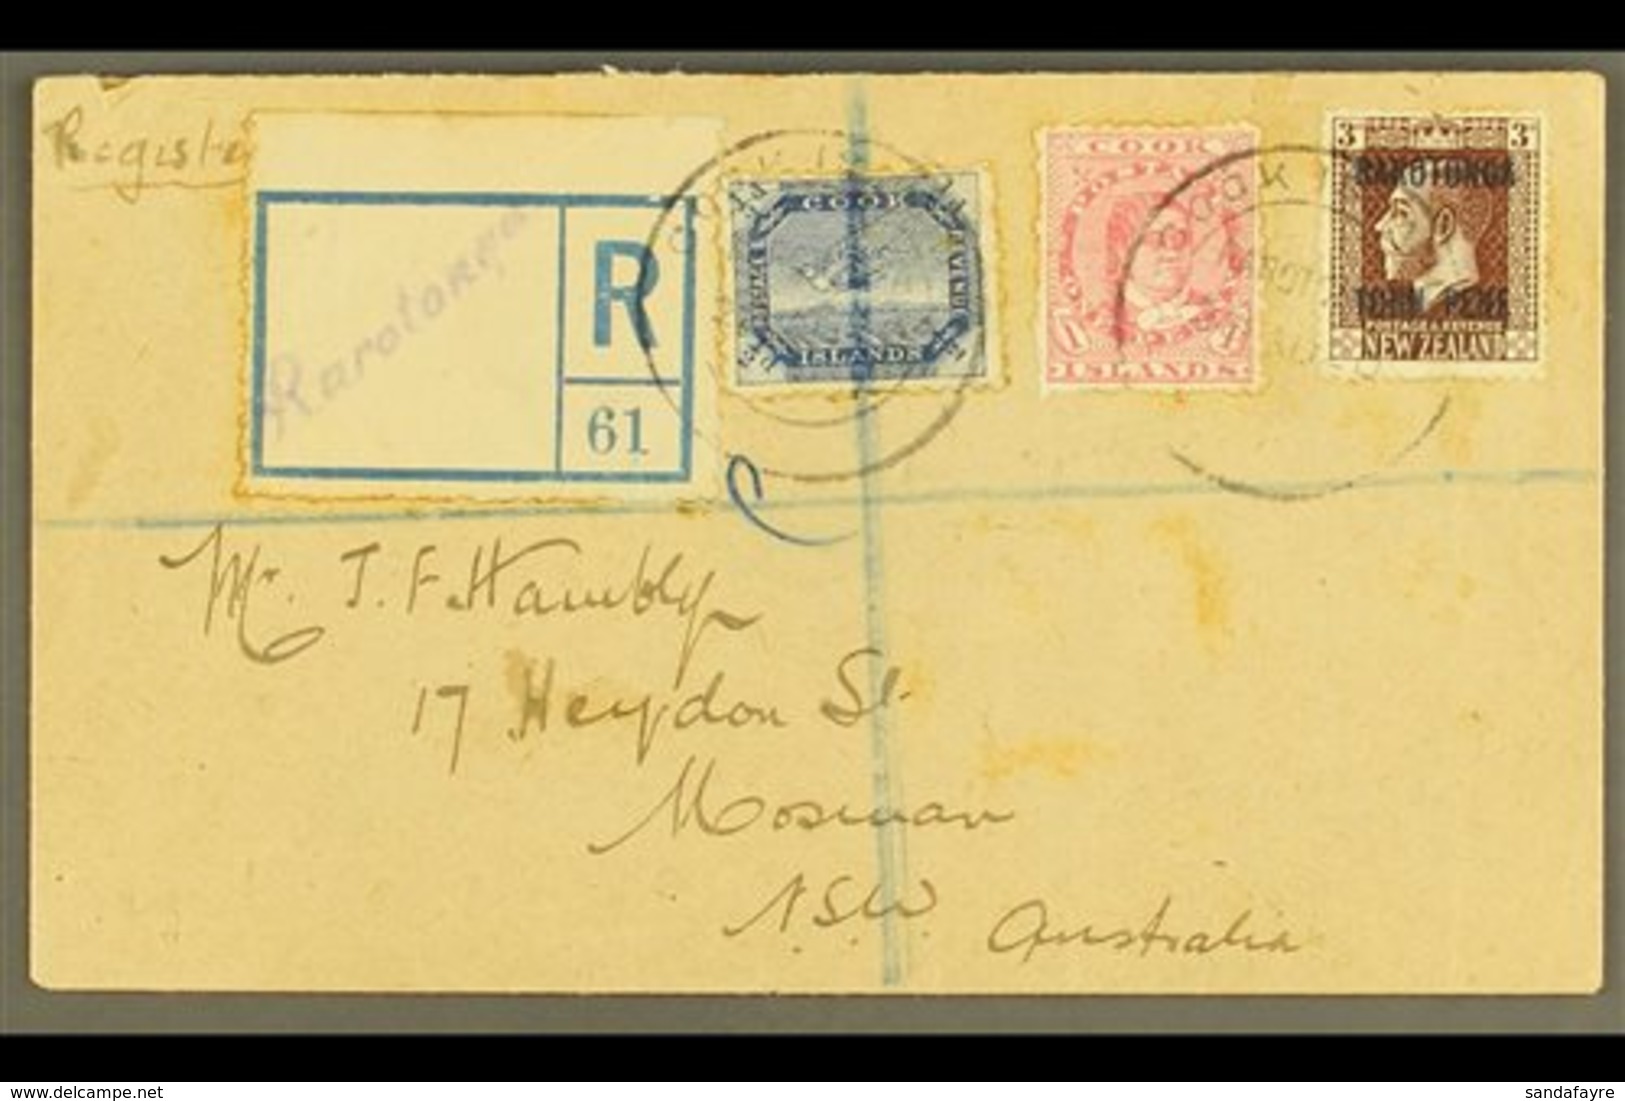 1920  (Aug) Envelope Registered To Australia, Bearing ½d Blue Tern, 1d Rose Queen And 3d Chocolate Tied By Rarotonga Cds - Cook Islands